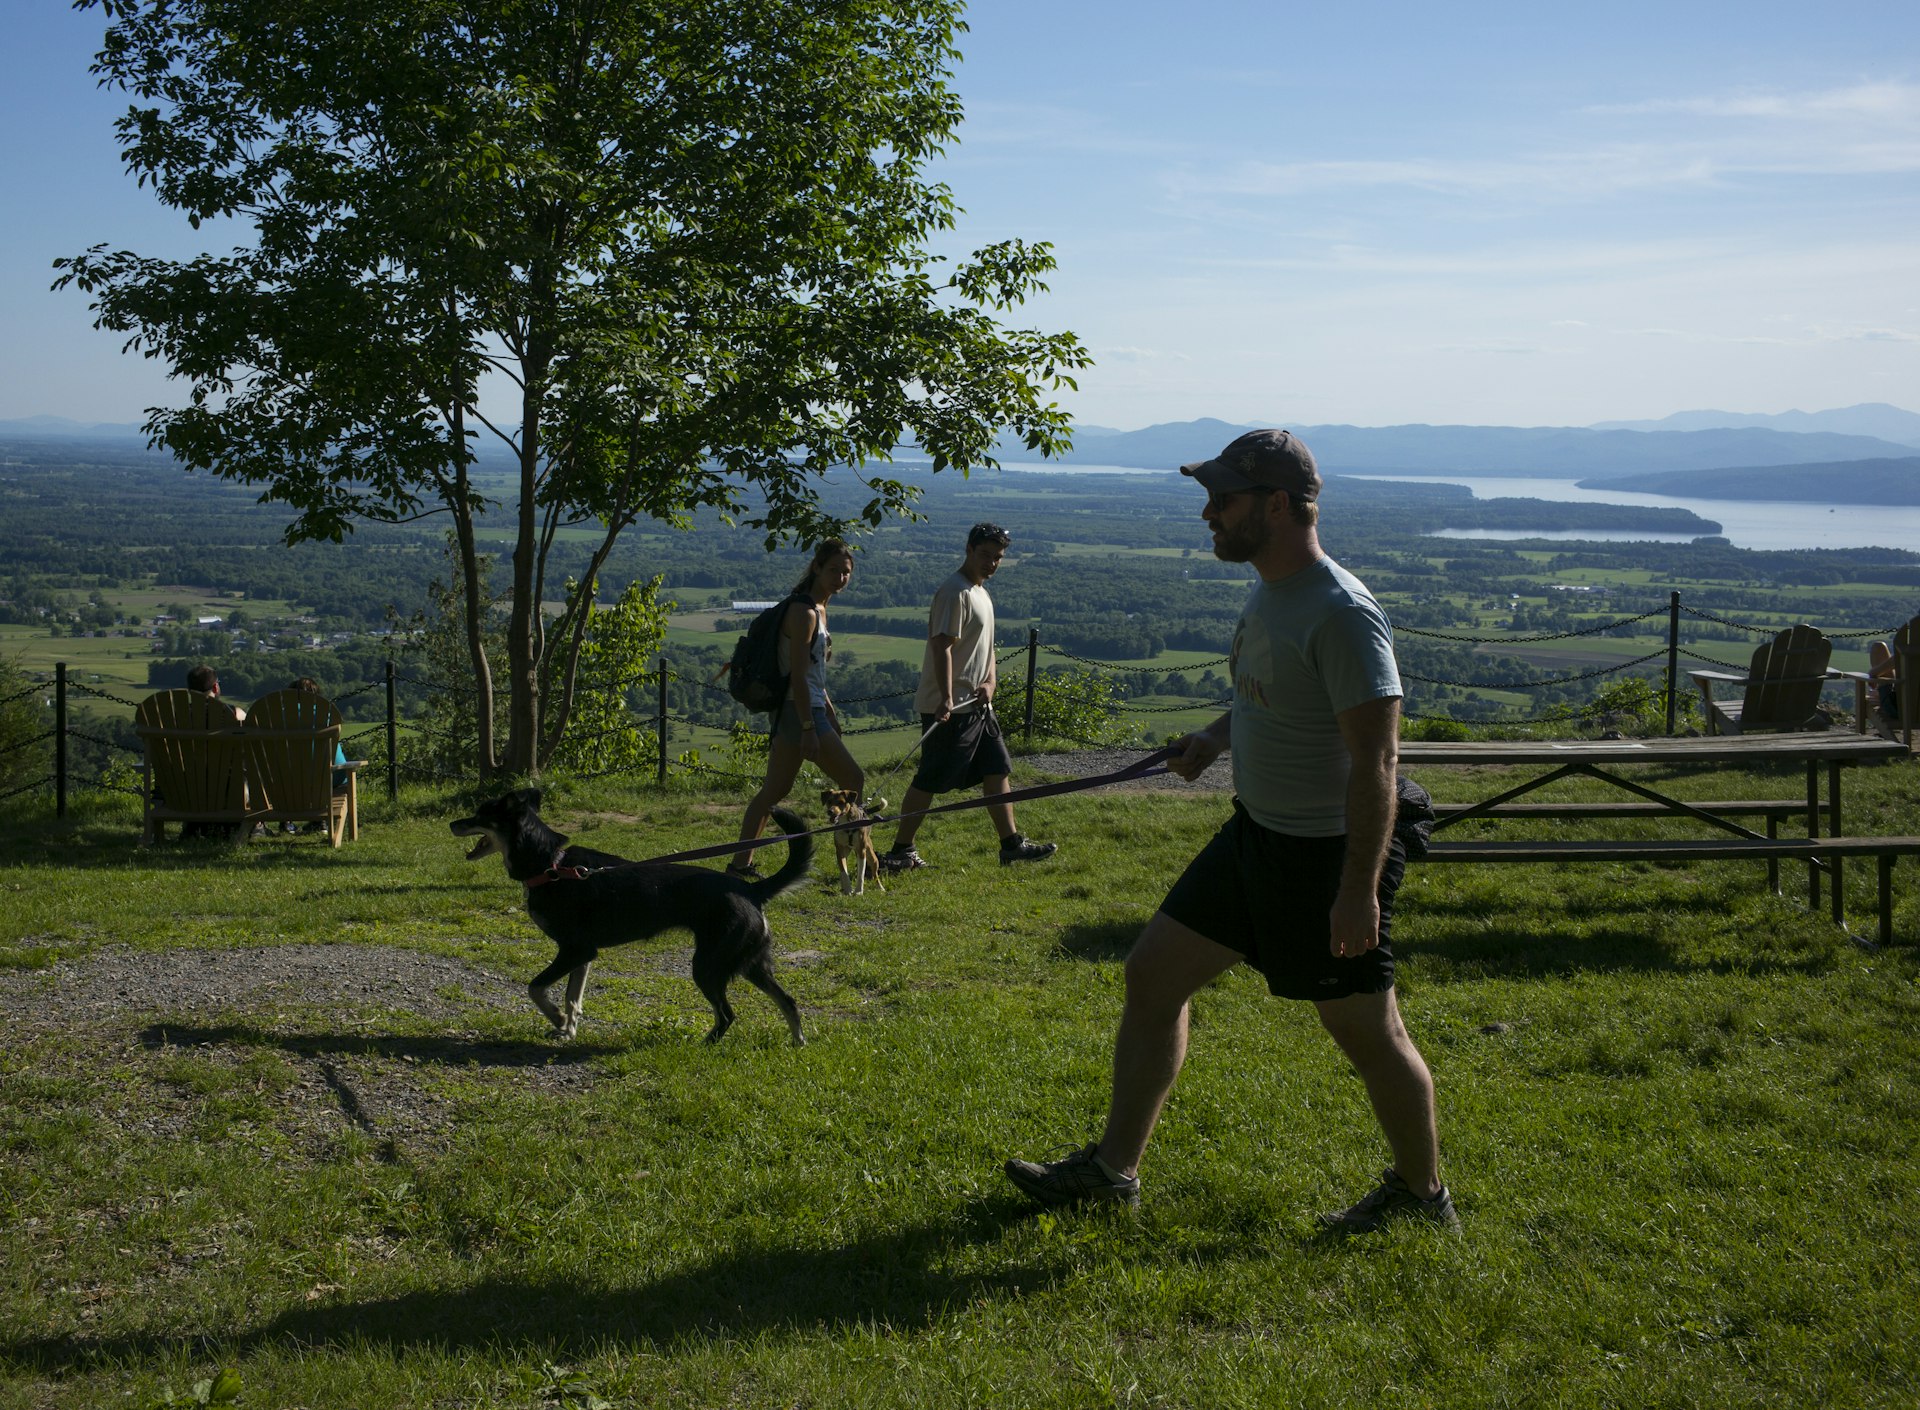 View of hikers, several with pet dogs, at a scenic overlook site in Mount Philo State Park, Charlotte, Vermont. Lake Champlain is visible in the background